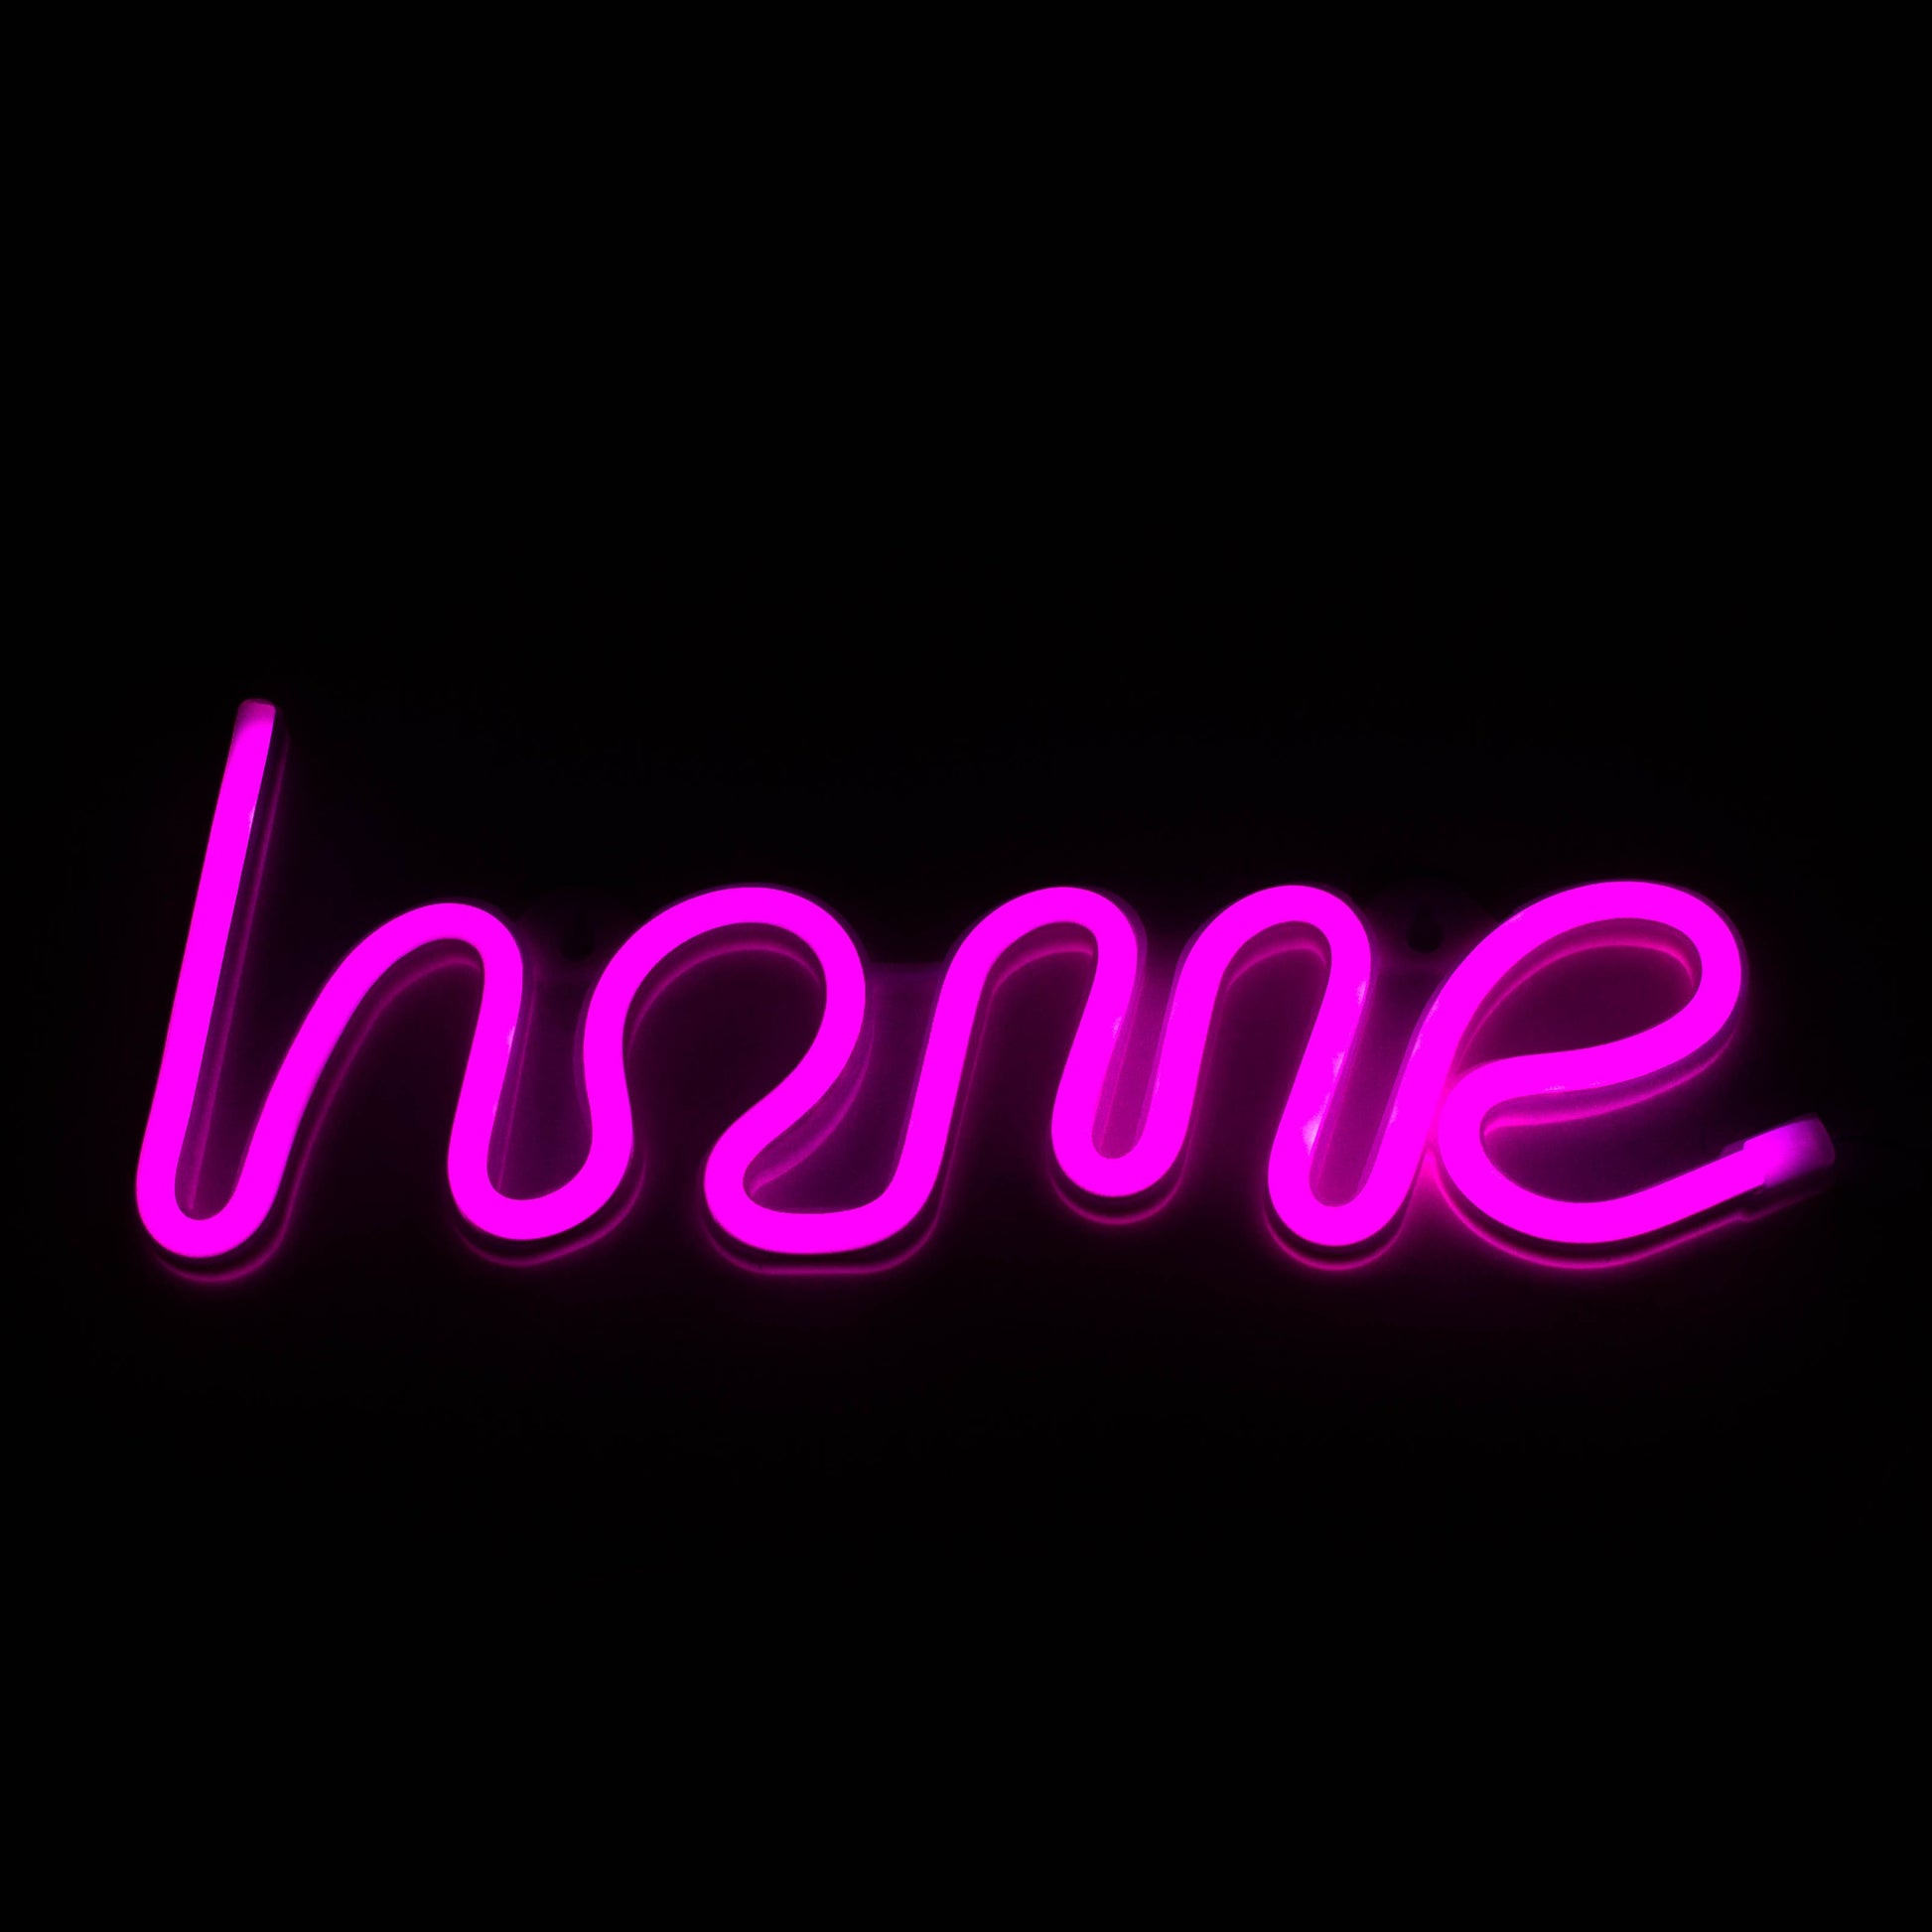 LED Neon Decoration Signs - Letters Collections_1